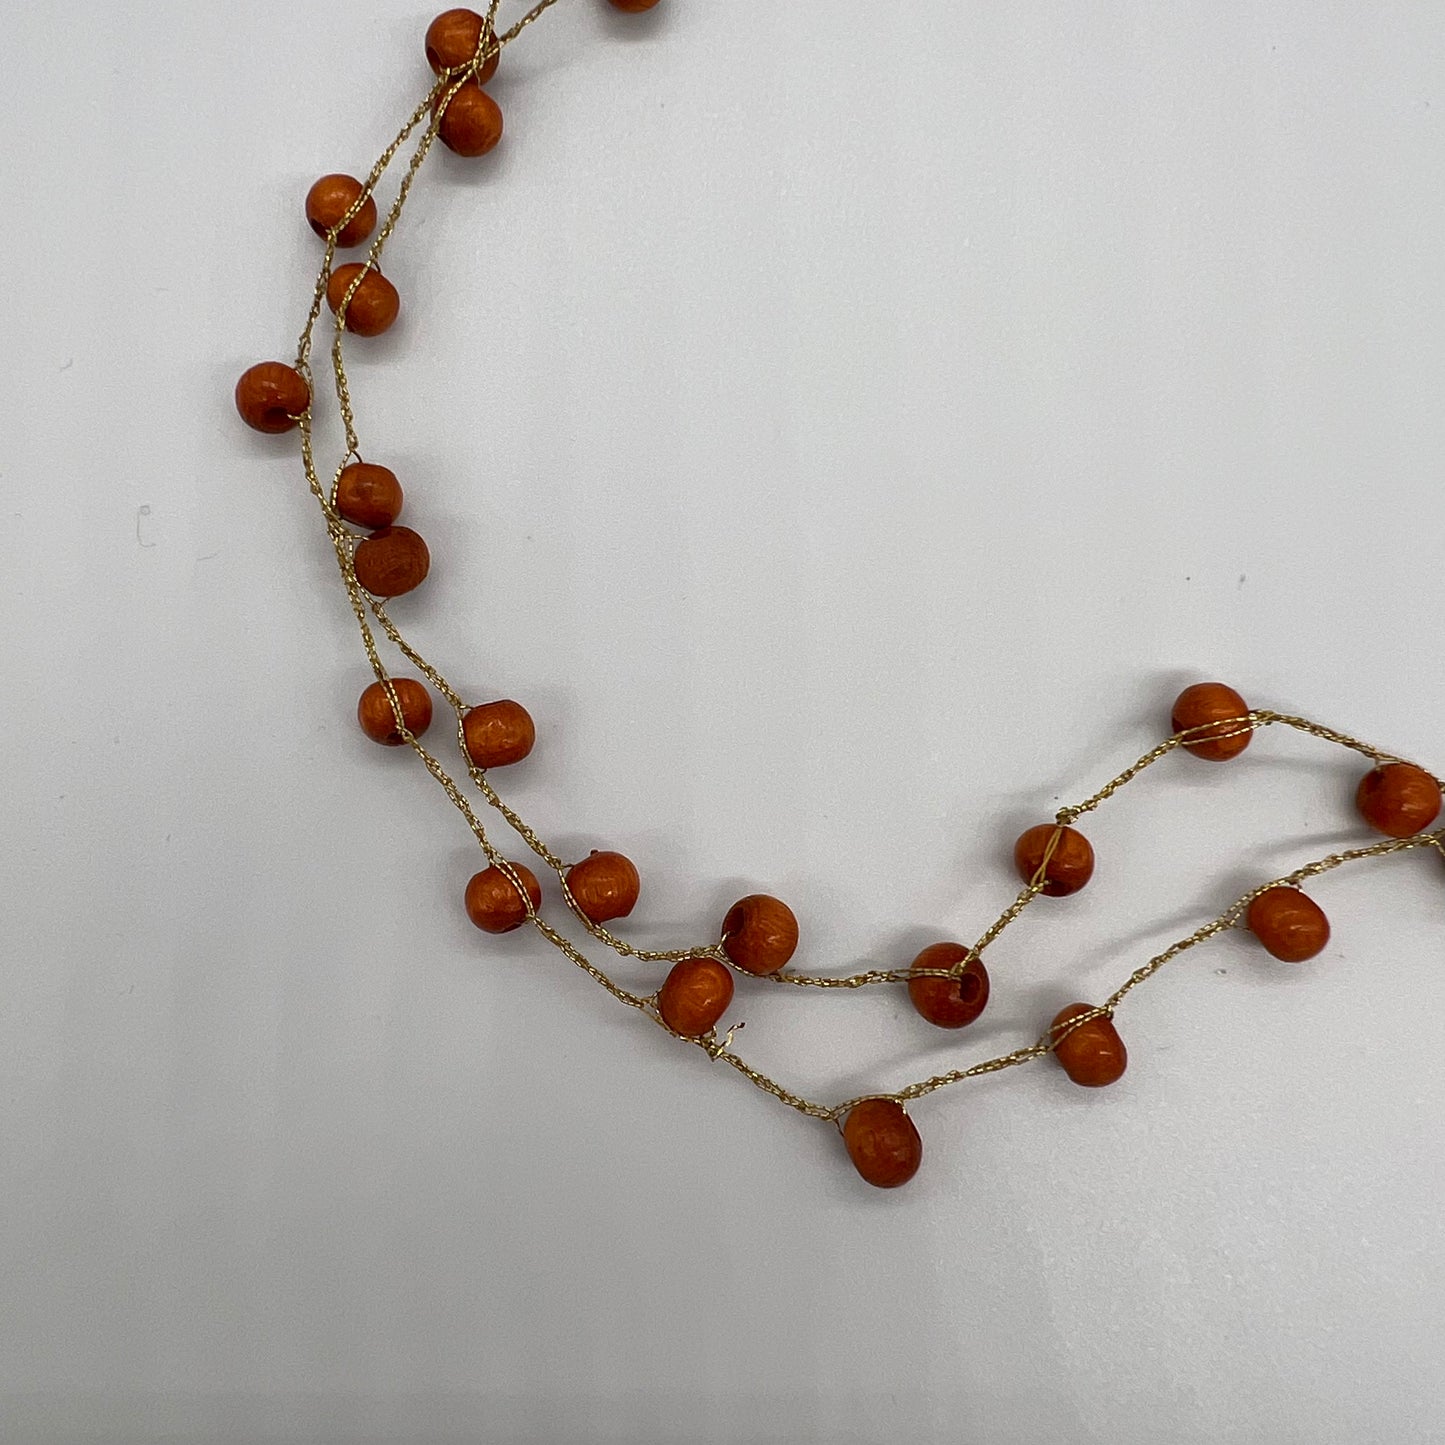 Berries on a Branch Necklace